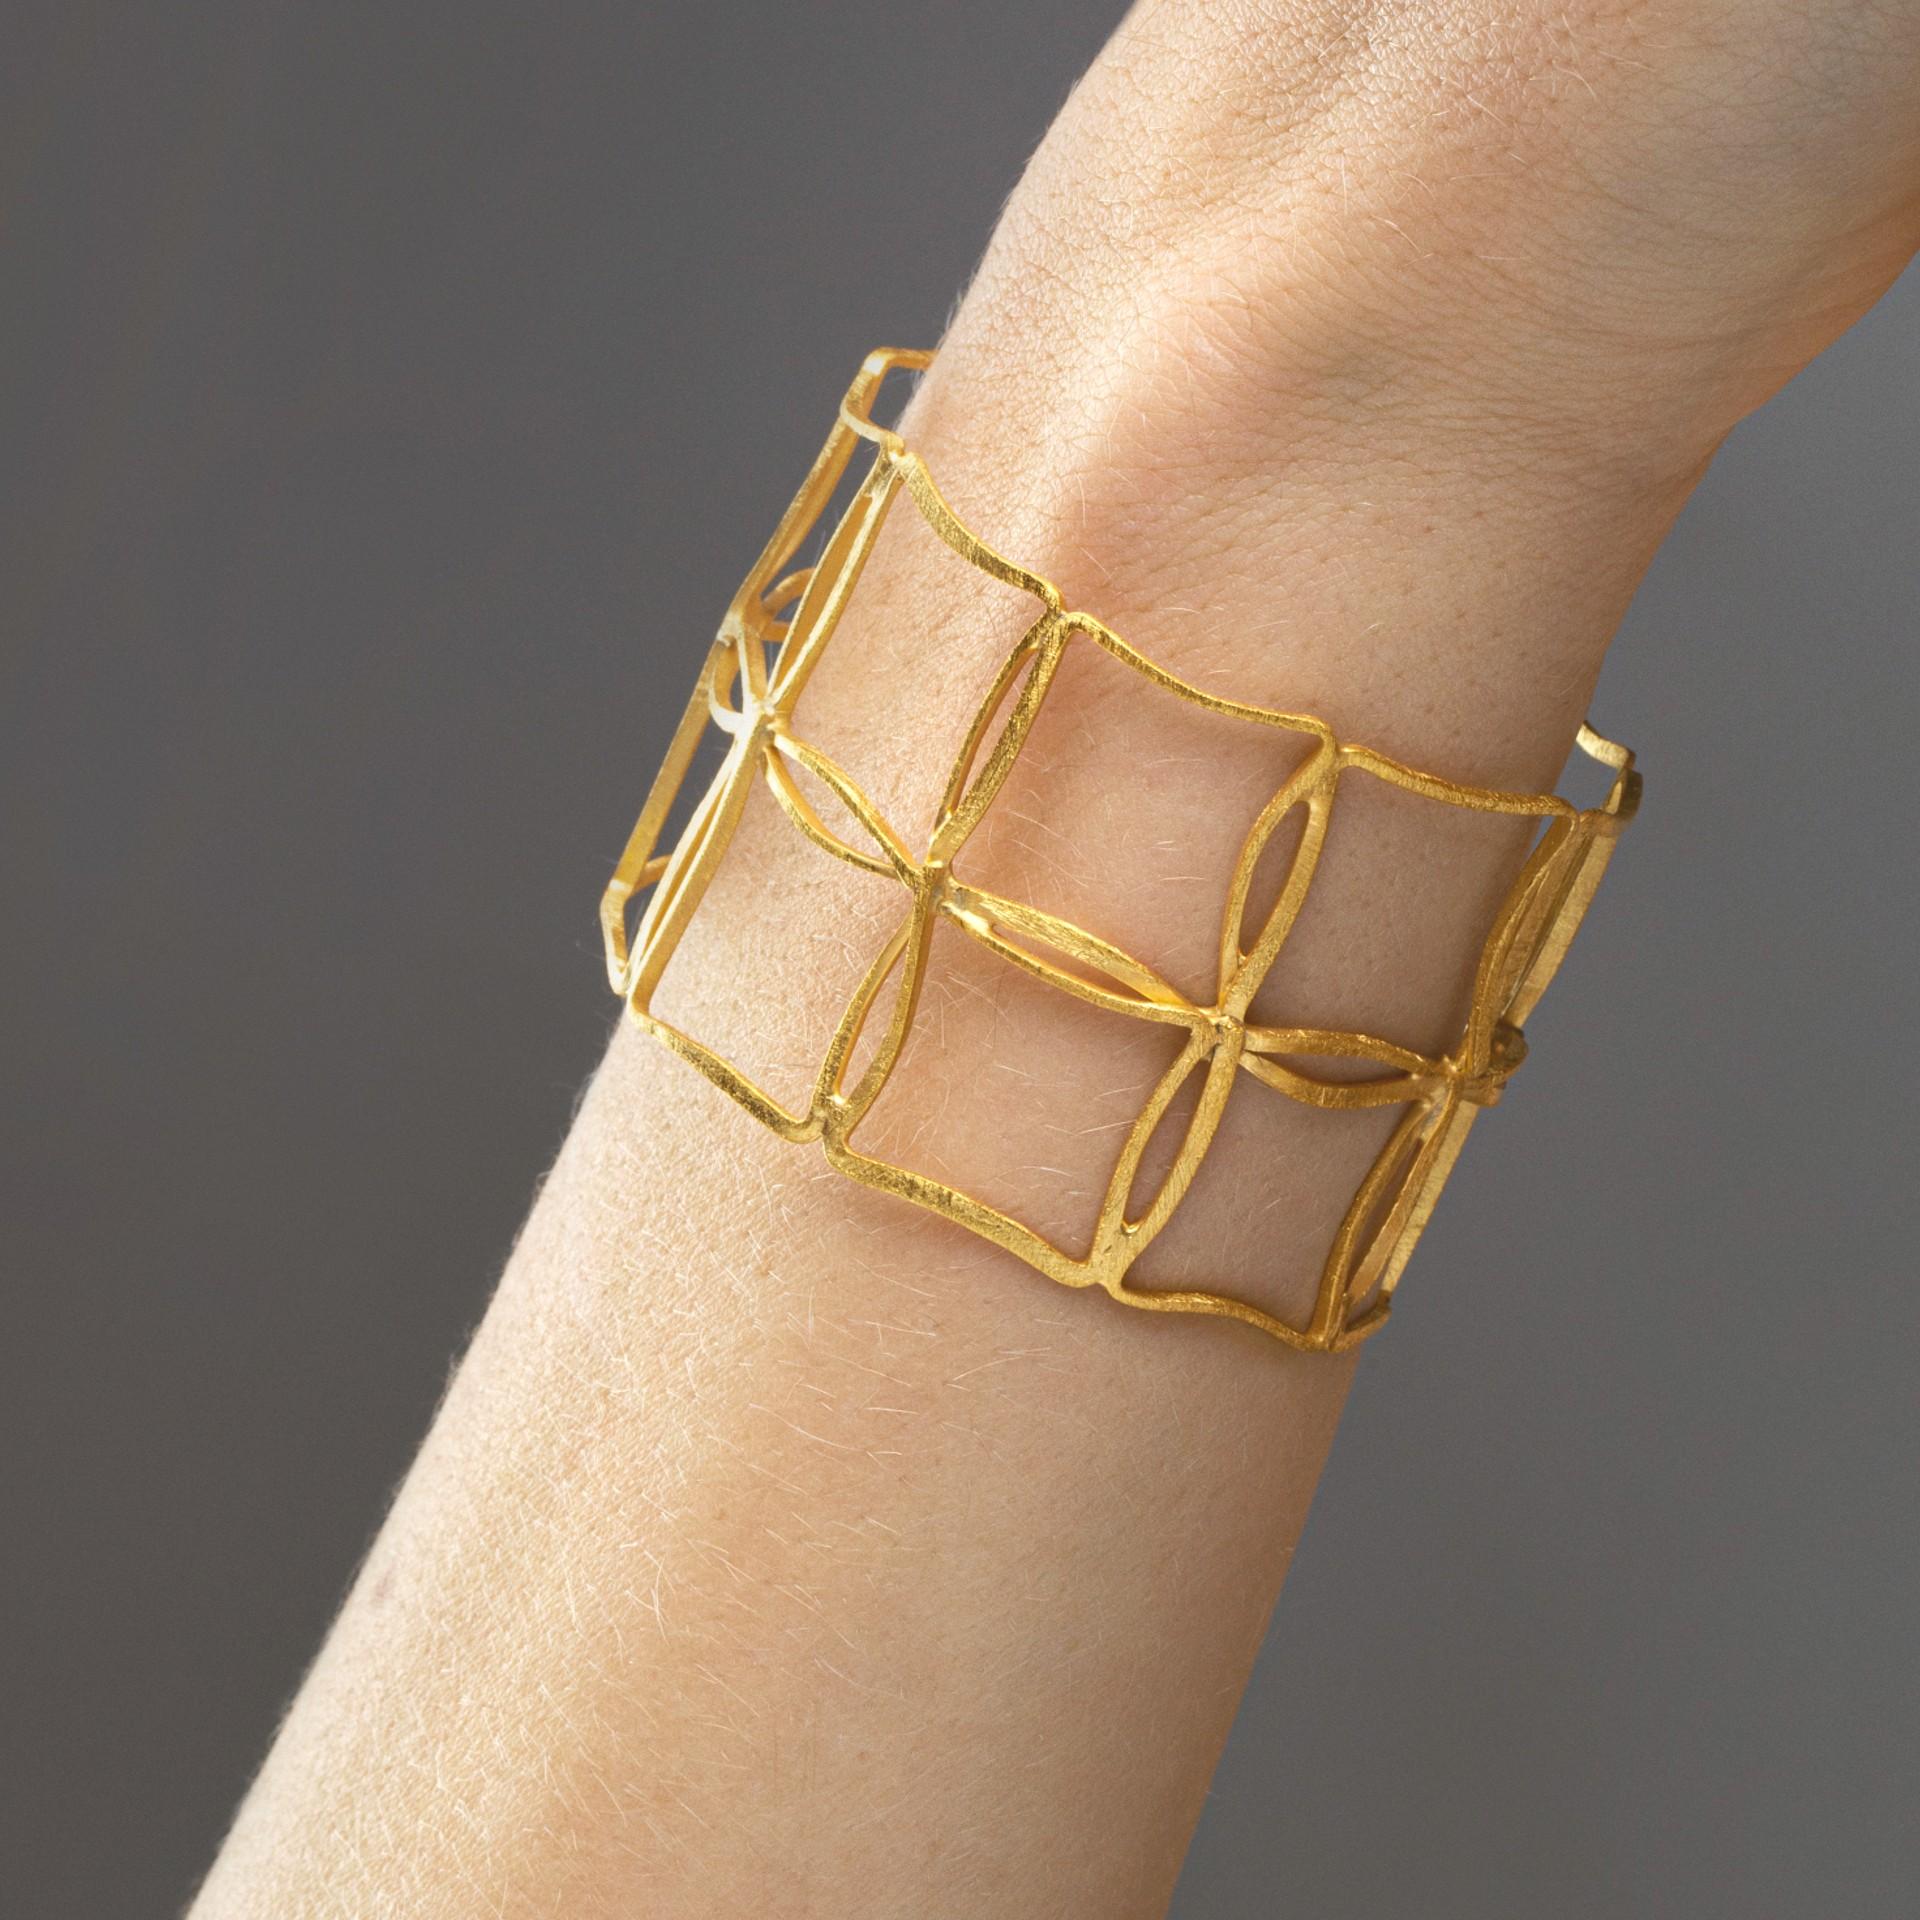 Alex Jona design collection, hand crafted in Italy, gold plated sterling silver cage bracelet with a brushed finish. 
Alex Jona jewels stand out for the careful attention given to details during all the manufacturing process. Alex's passion for